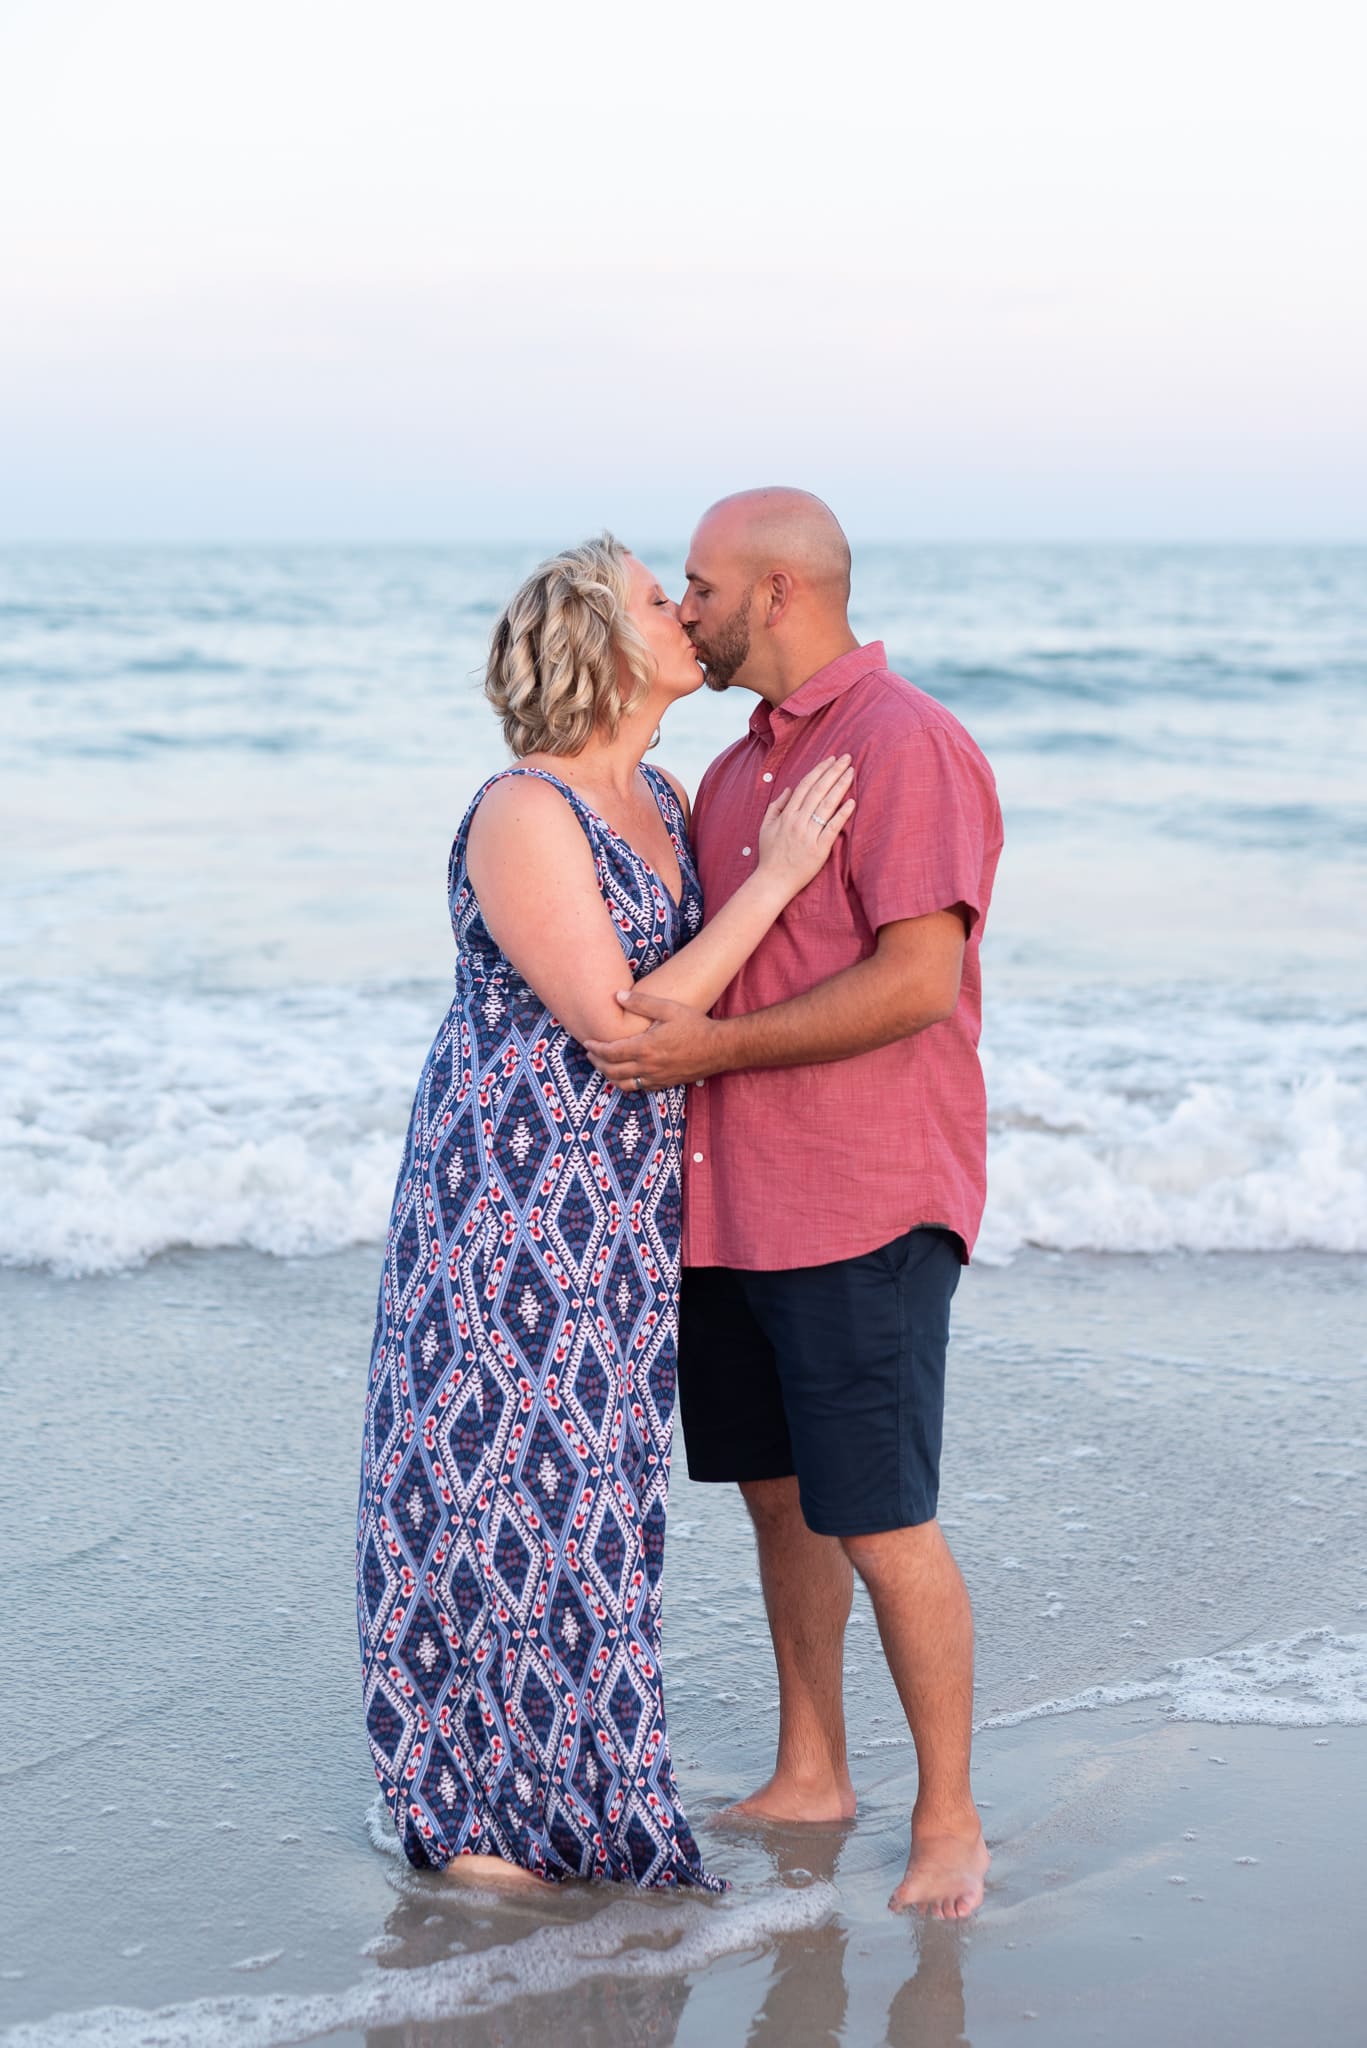 Kiss in front of the ocean - Huntington Beach State Park